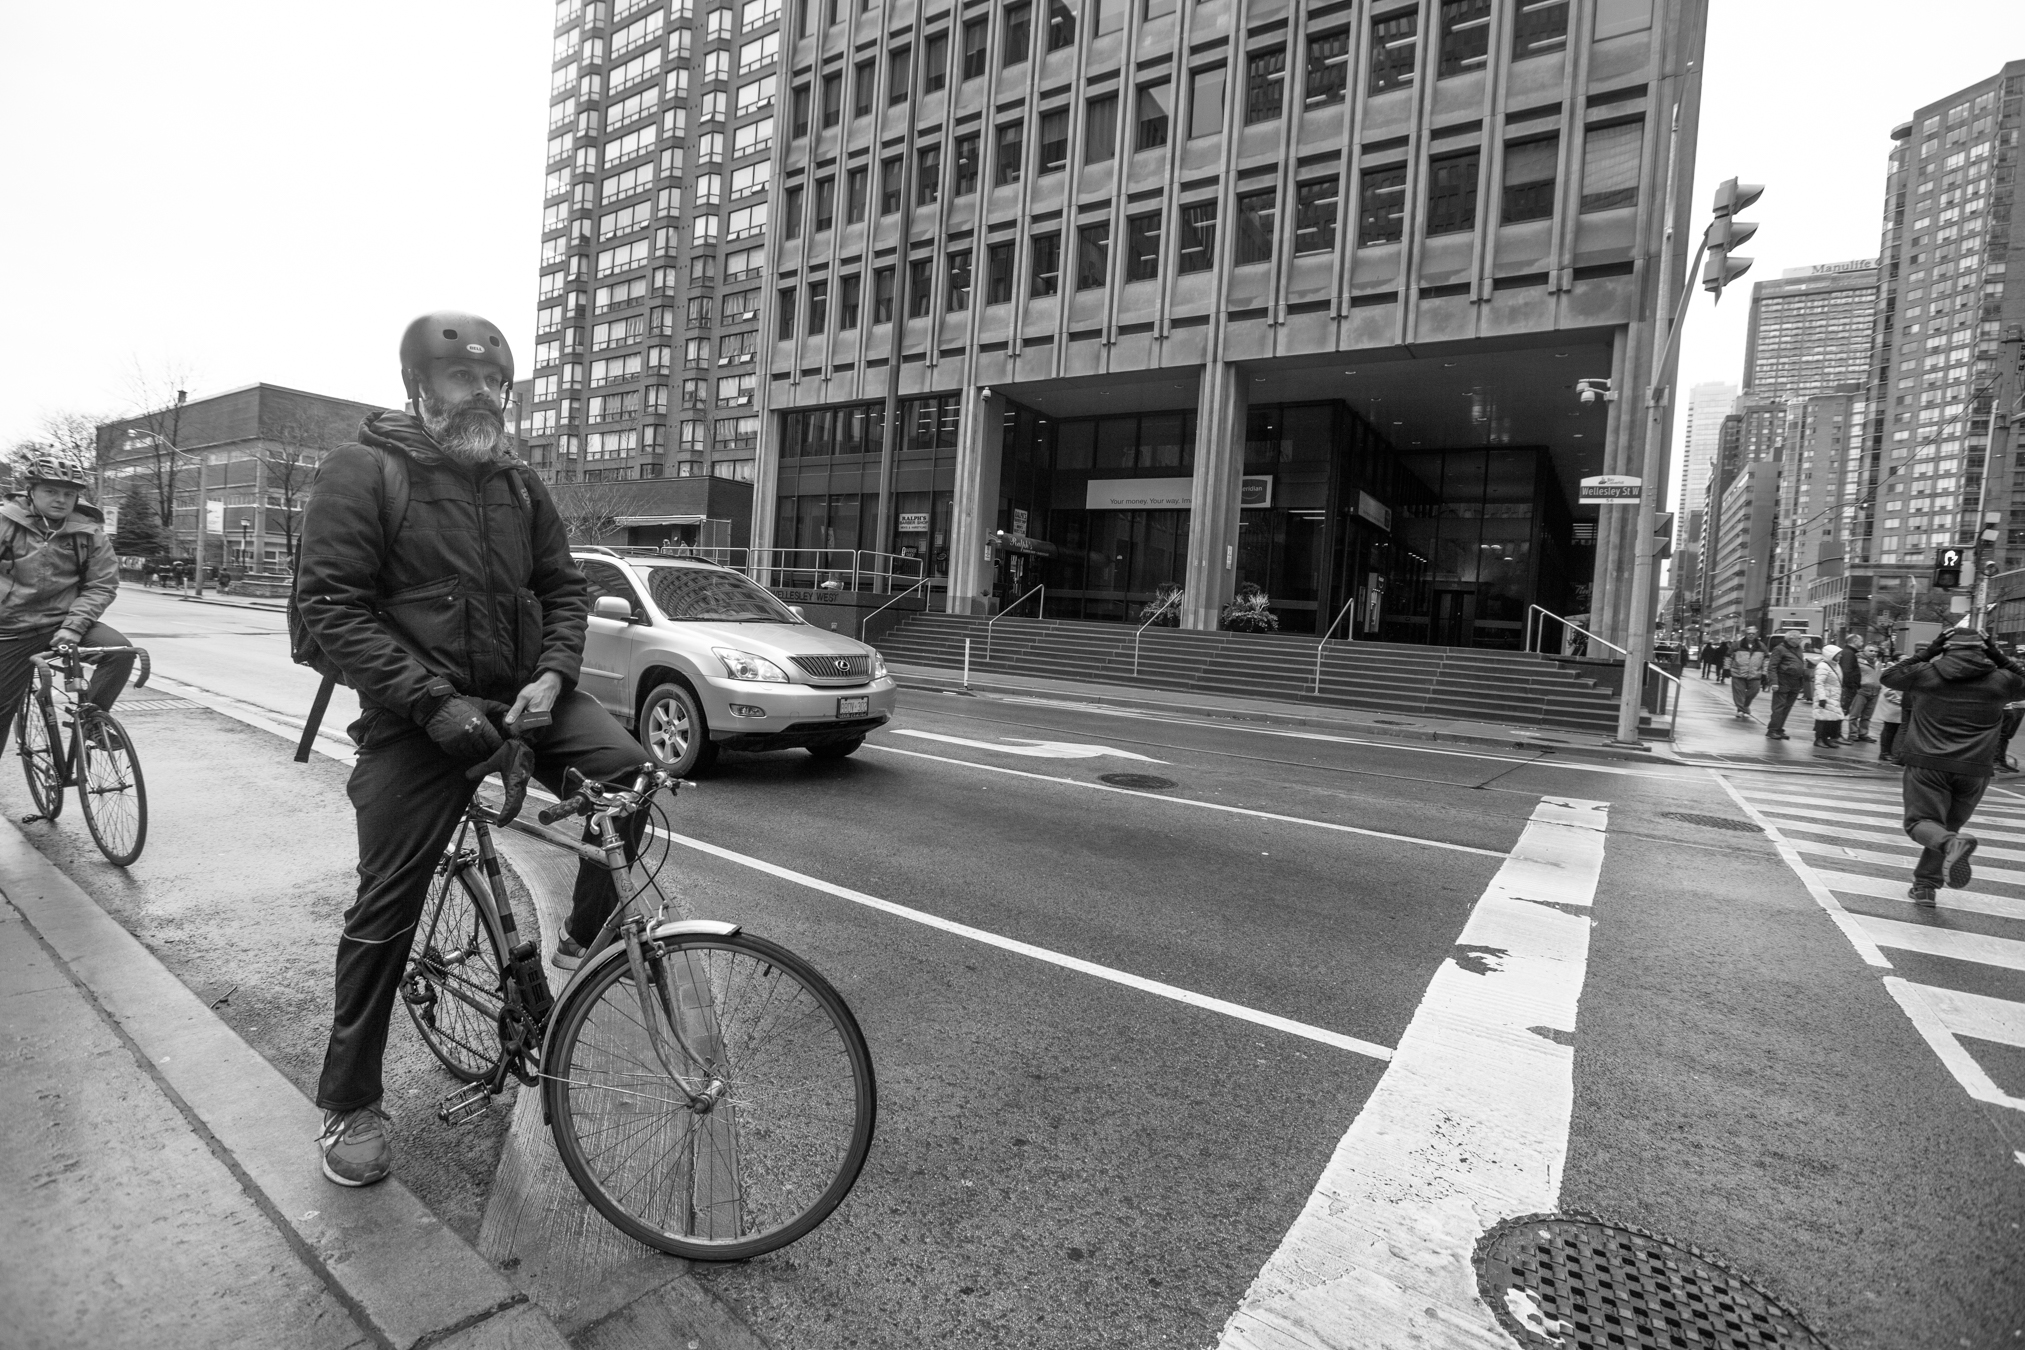 The bike Culture in TO is as strong as this gent's beard - Wellesly street - Toronto, Ontario